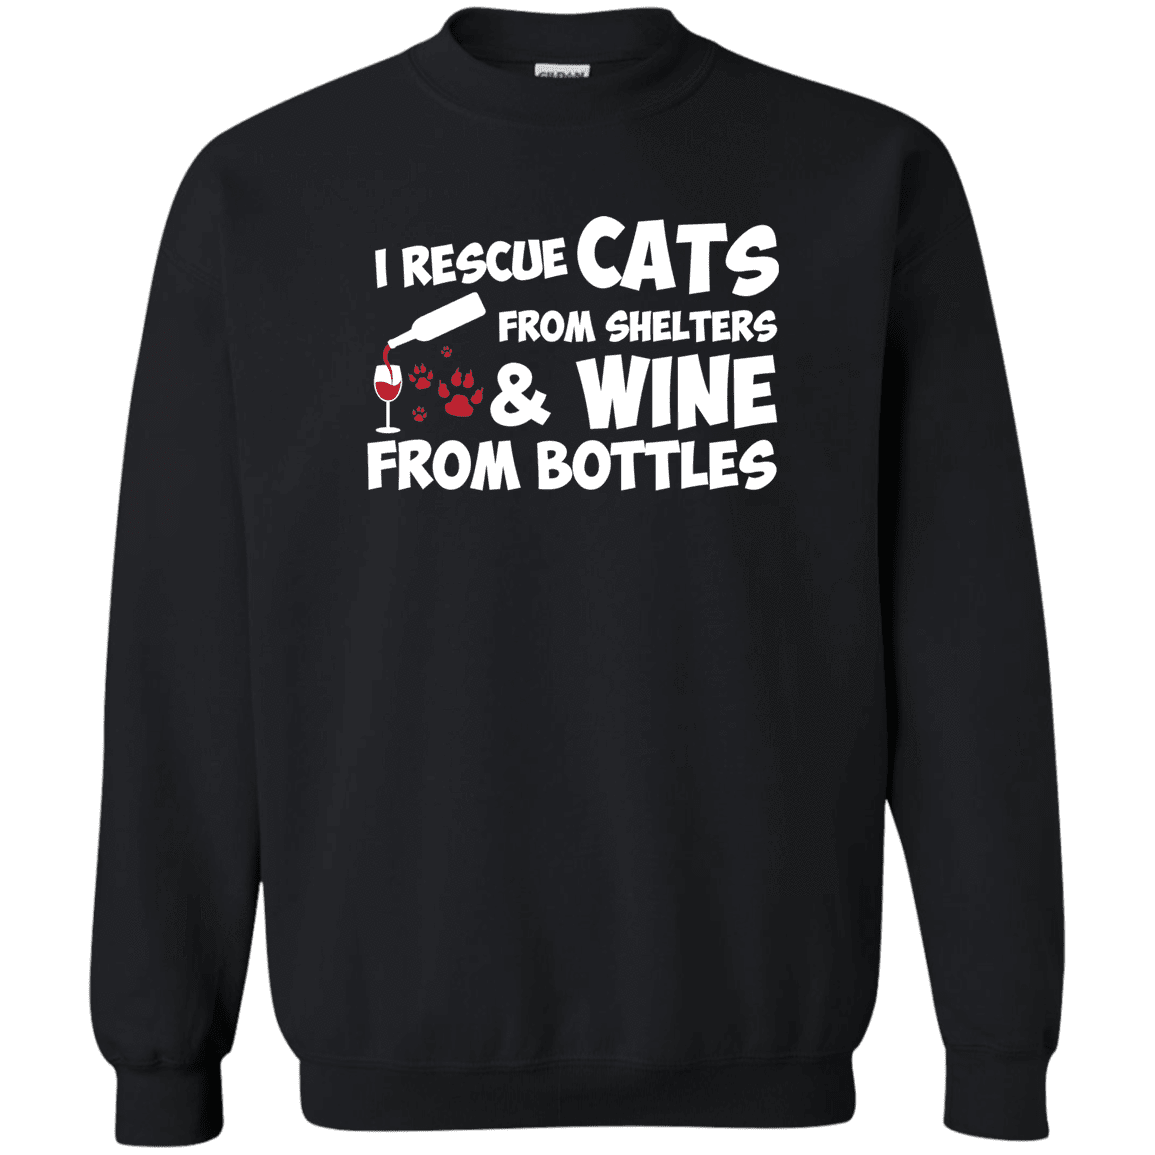 I Rescue Cats And Wine - Sweatshirt.